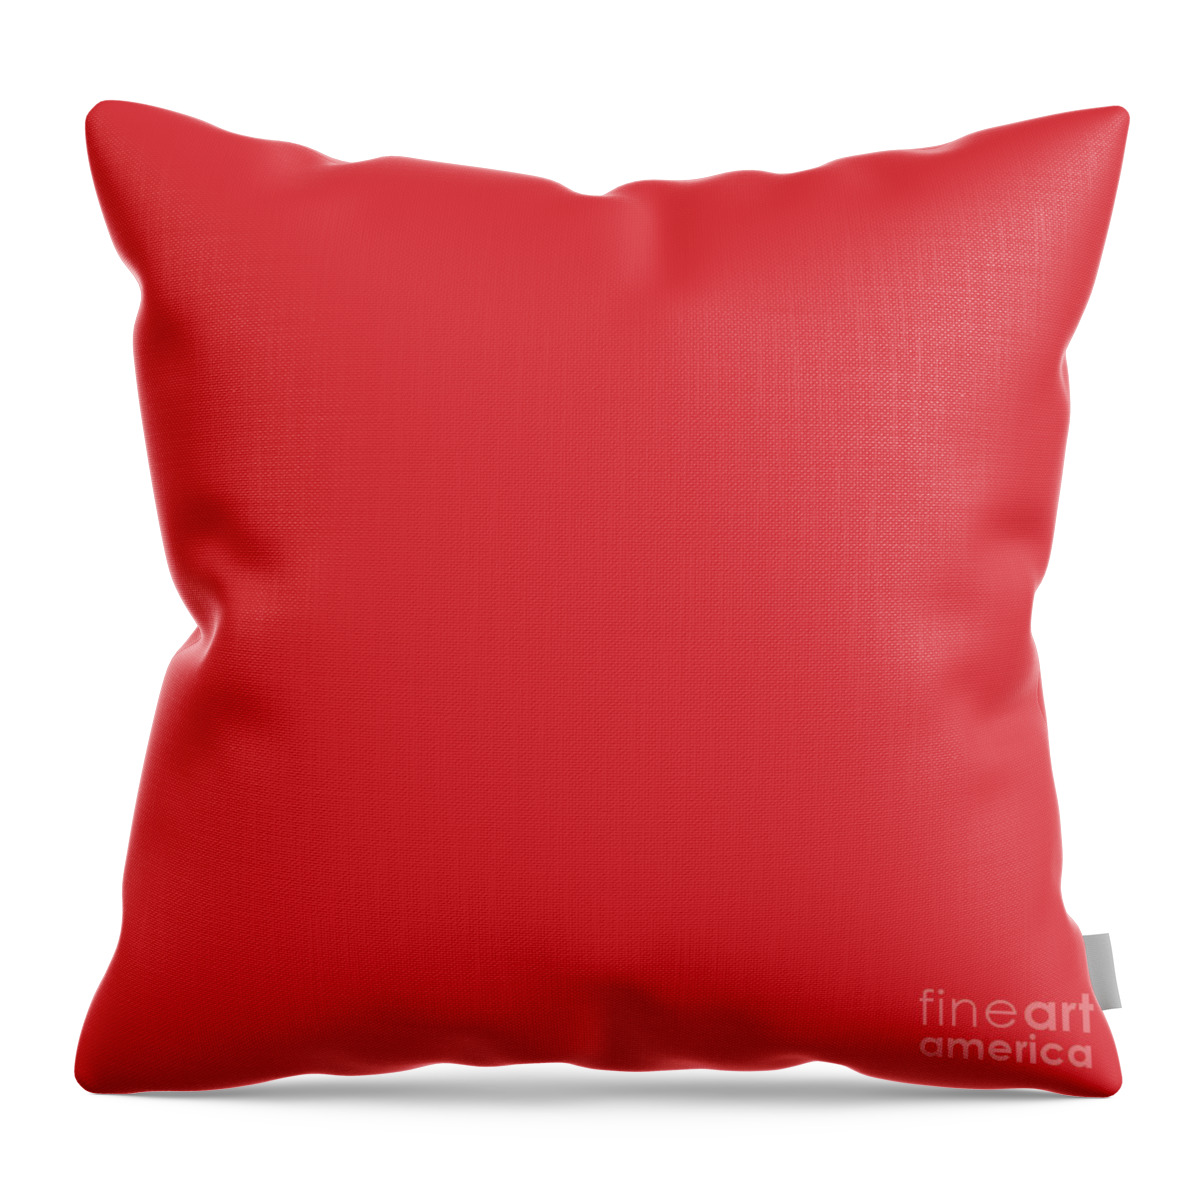 Poppy Red Throw Pillow featuring the digital art Poppy Red by Sharon Mau